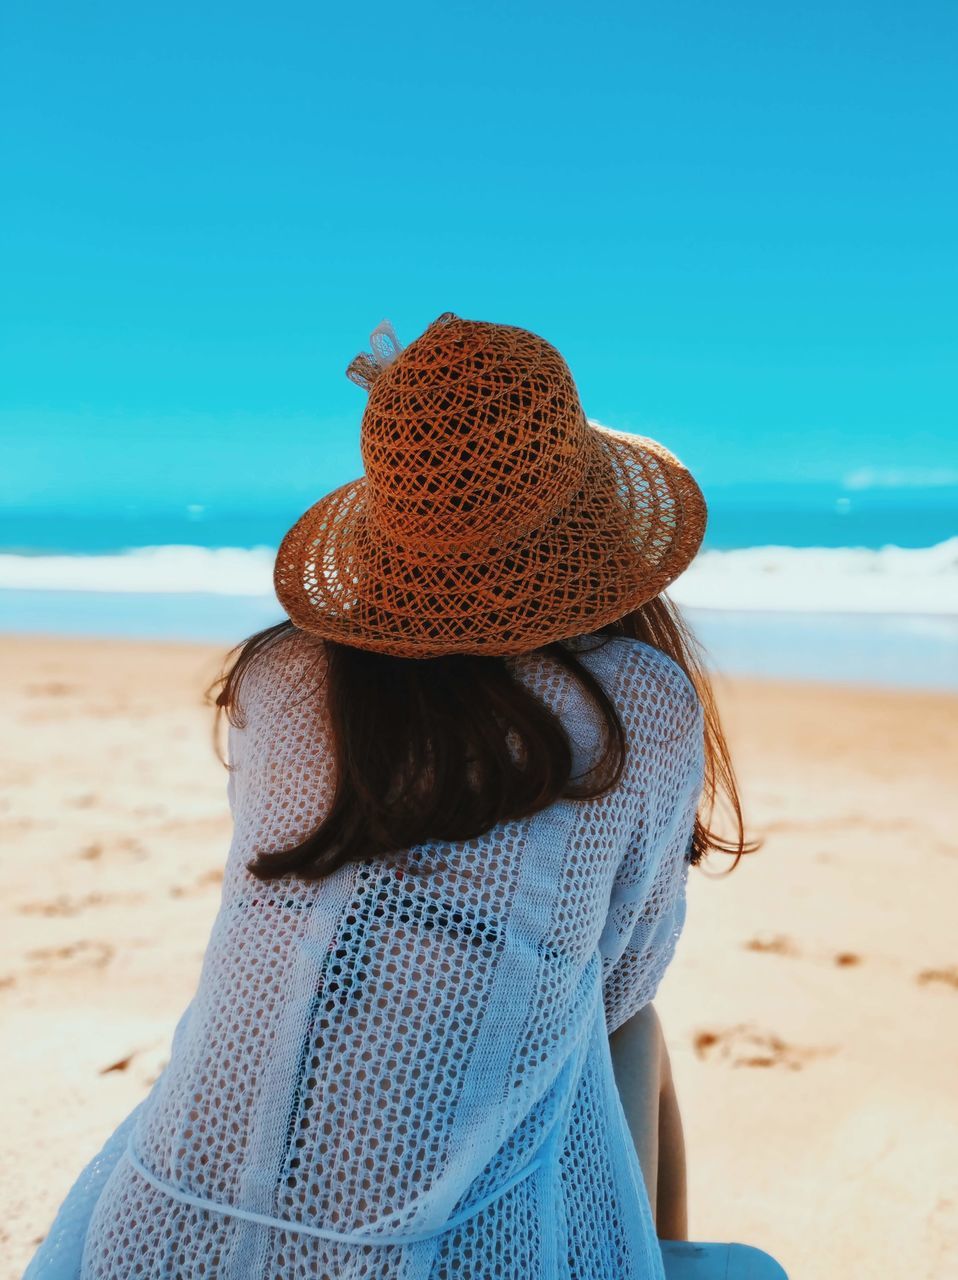 hat, beach, land, clothing, real people, one person, sky, sand, leisure activity, sea, women, lifestyles, water, rear view, adult, day, nature, sun hat, horizon over water, outdoors, hairstyle